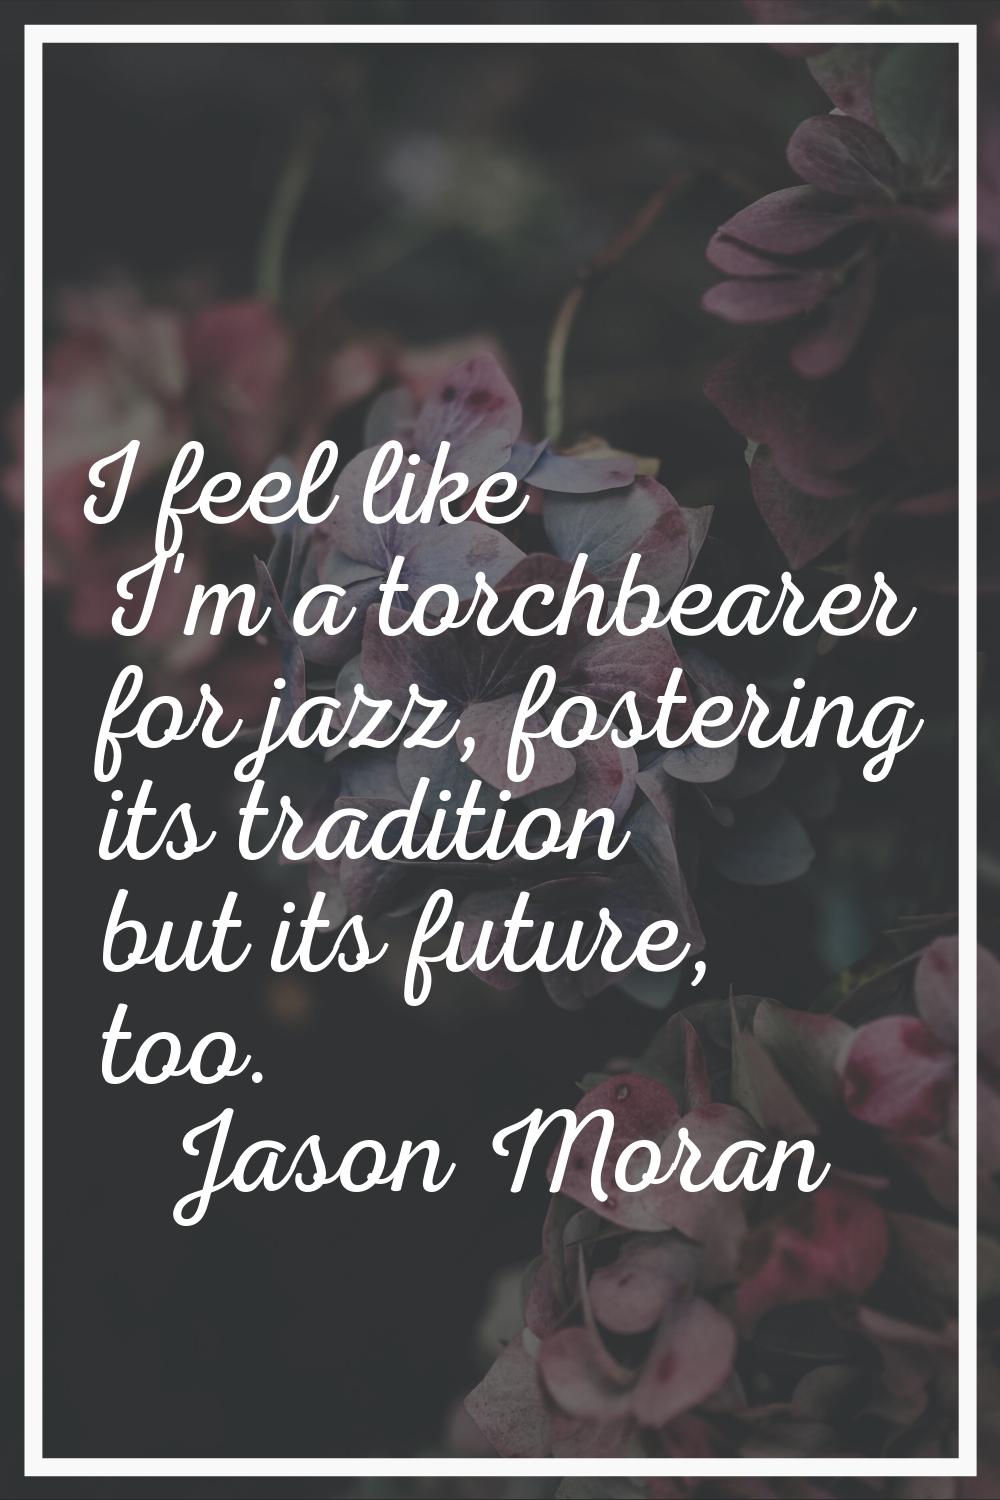 I feel like I'm a torchbearer for jazz, fostering its tradition but its future, too.